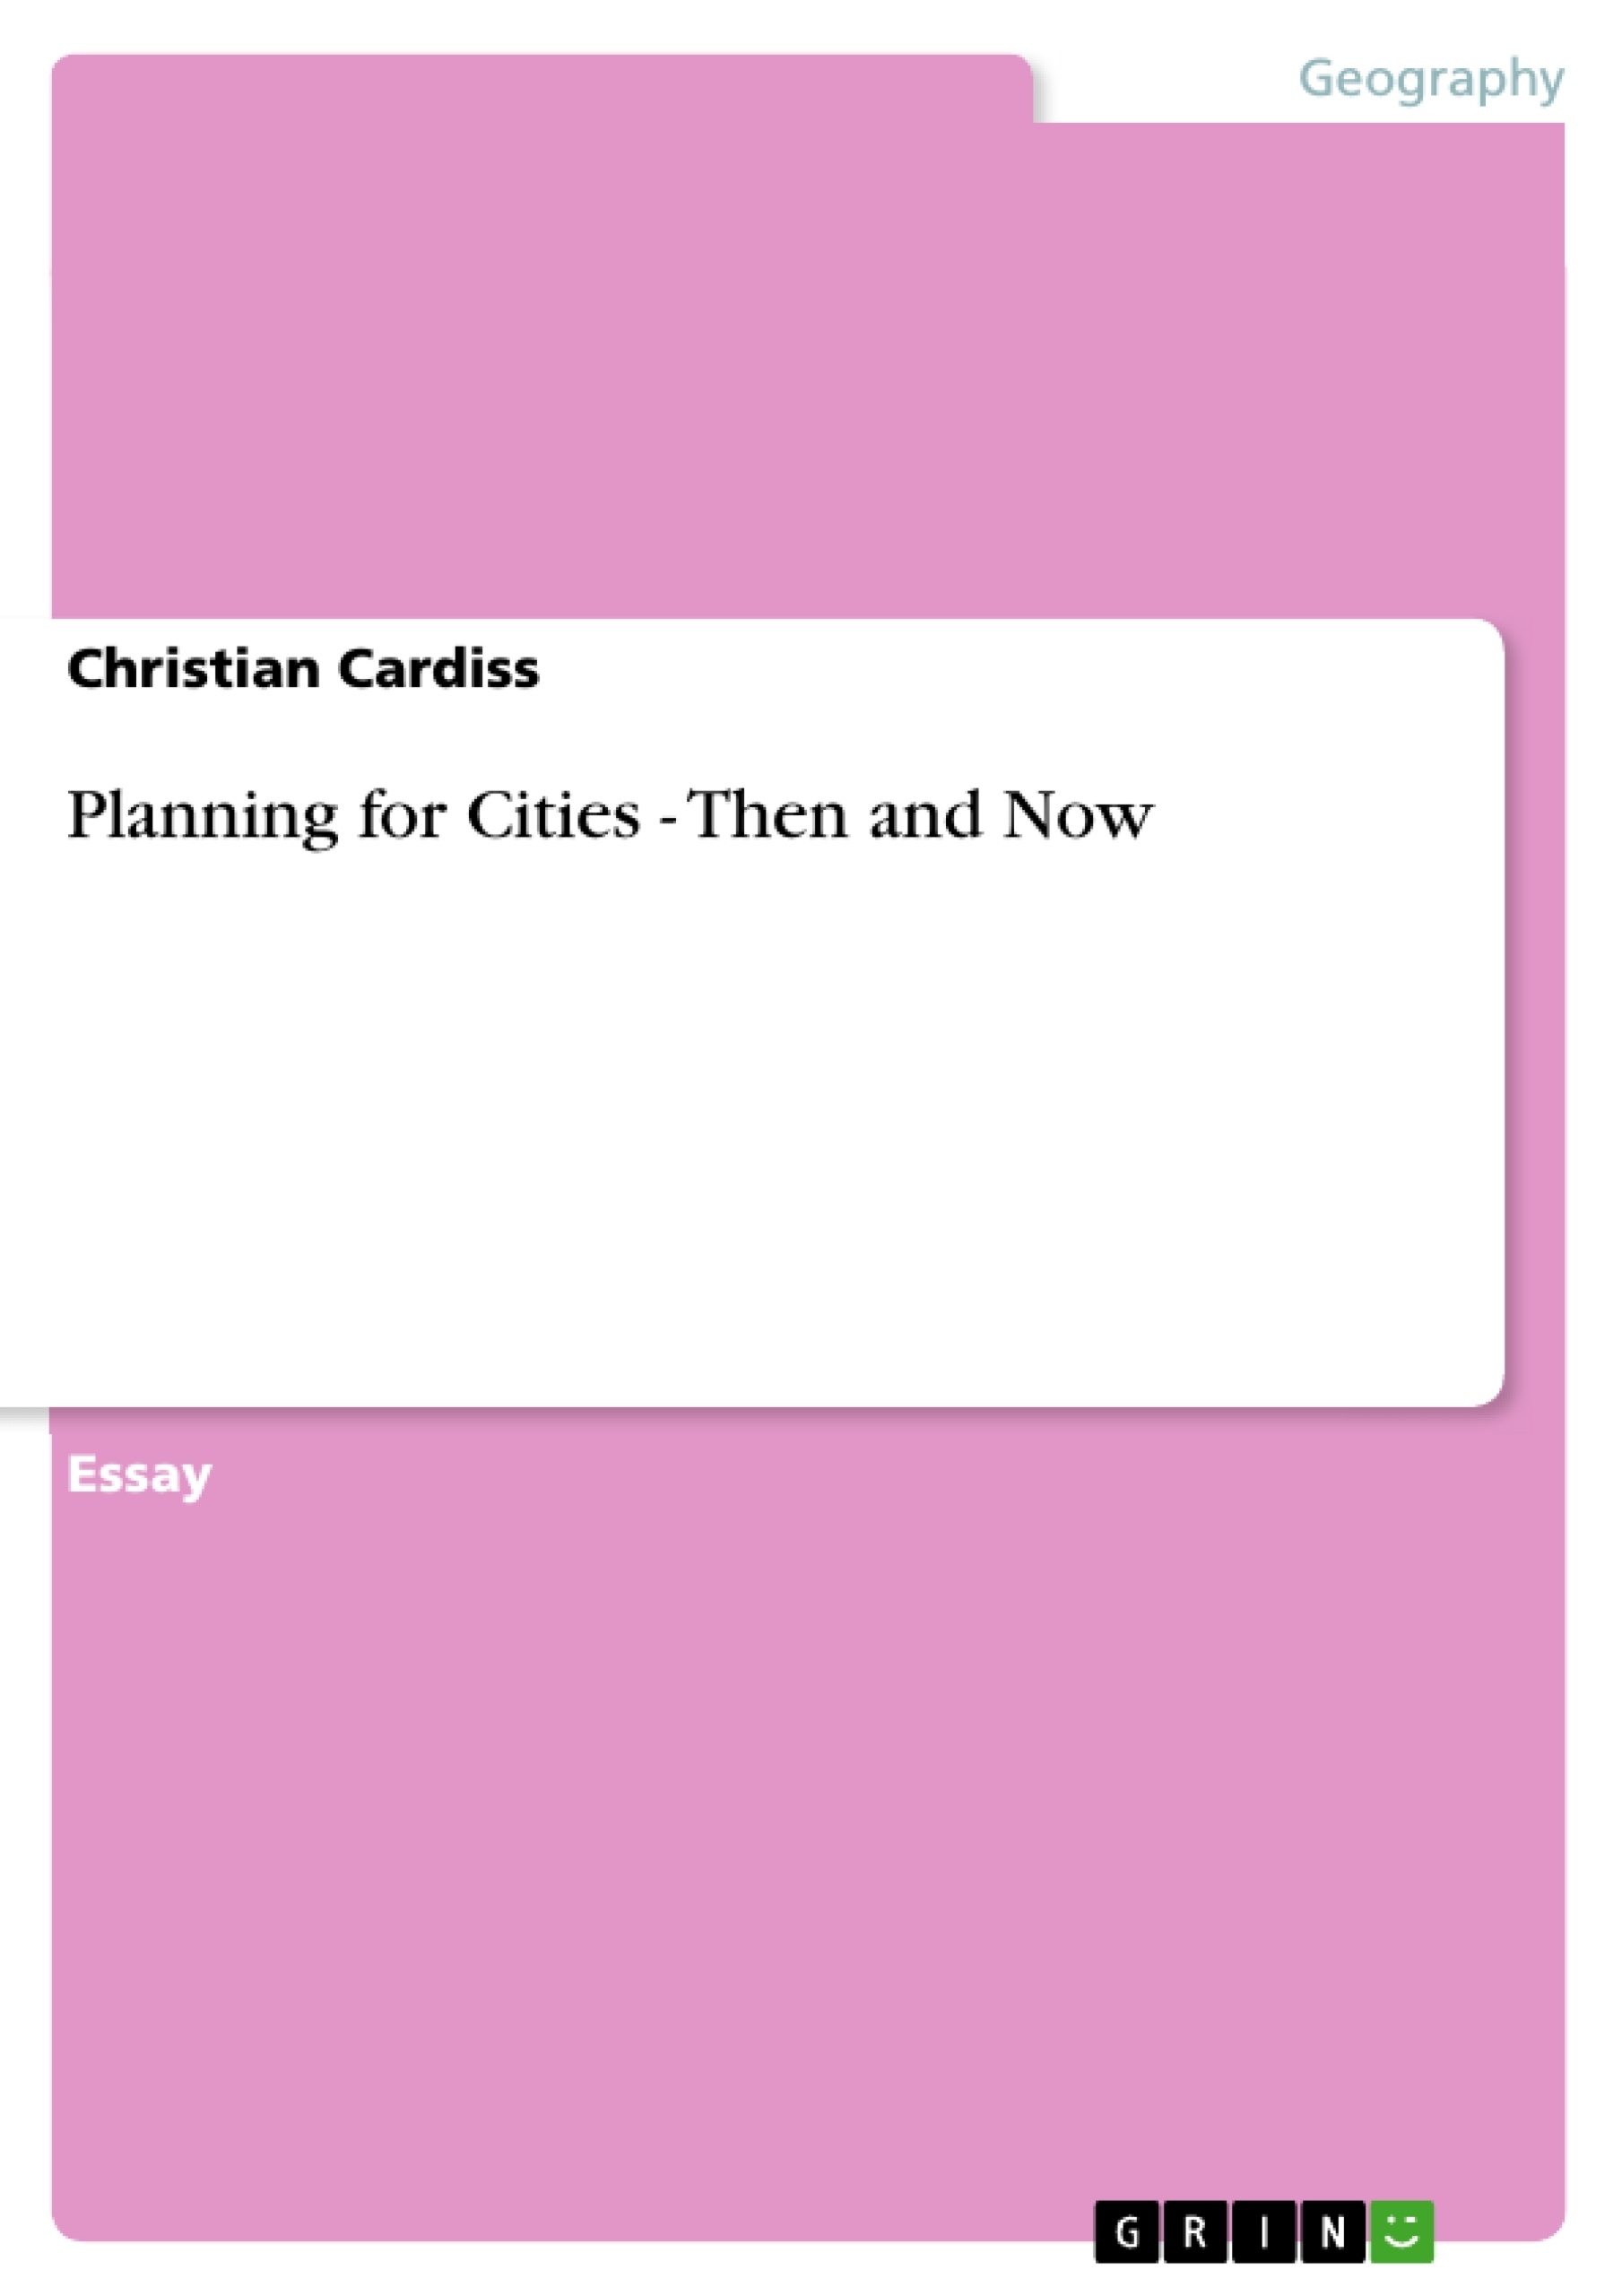 Title: Planning for Cities - Then and Now